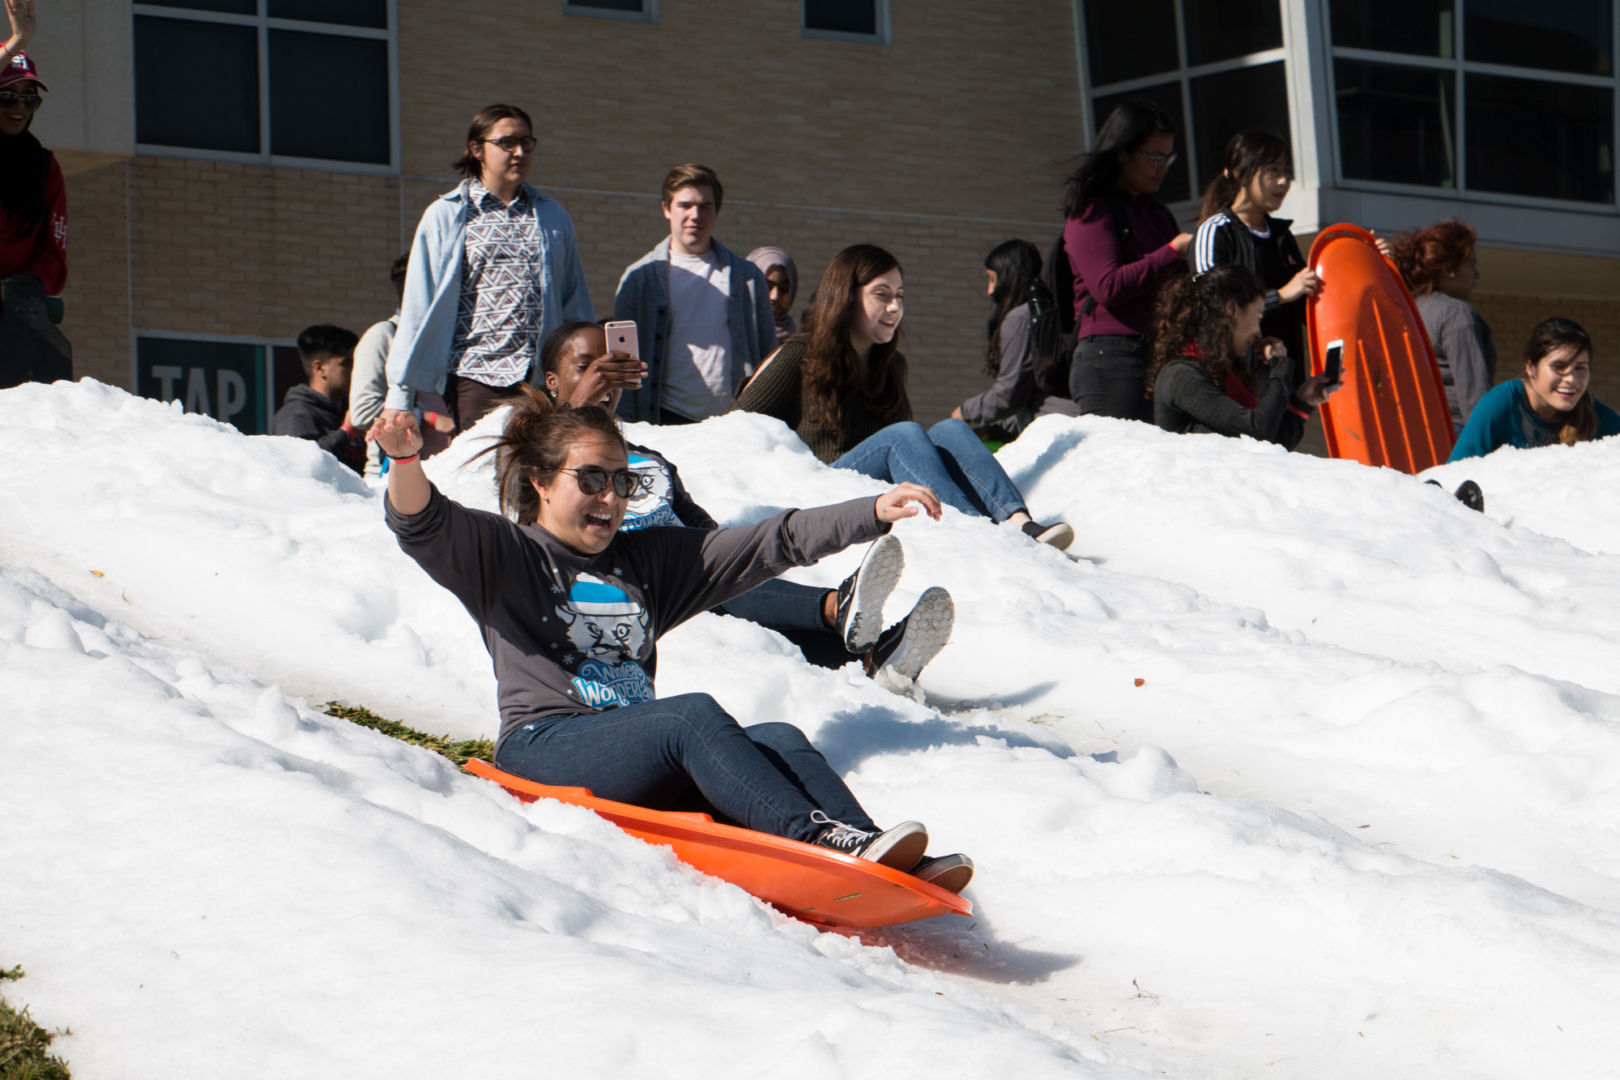 Bring your gloves and your friends to de-stress before finals at Student Program Board's Winter Wonderland. | File photo